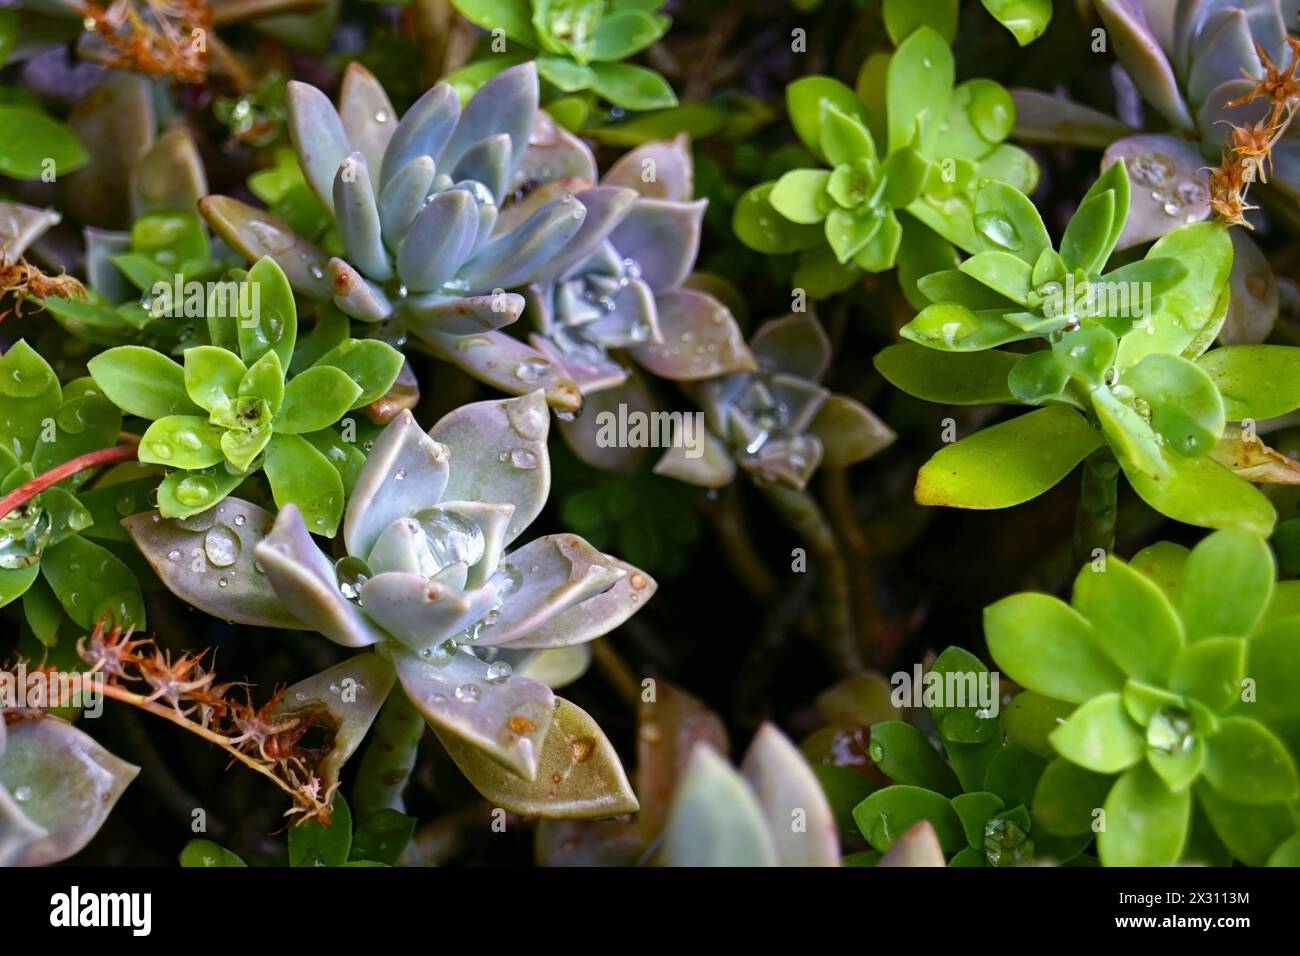 Sedum palmeri and Graptopetalum succulent leaves covered with water drops Stock Photo